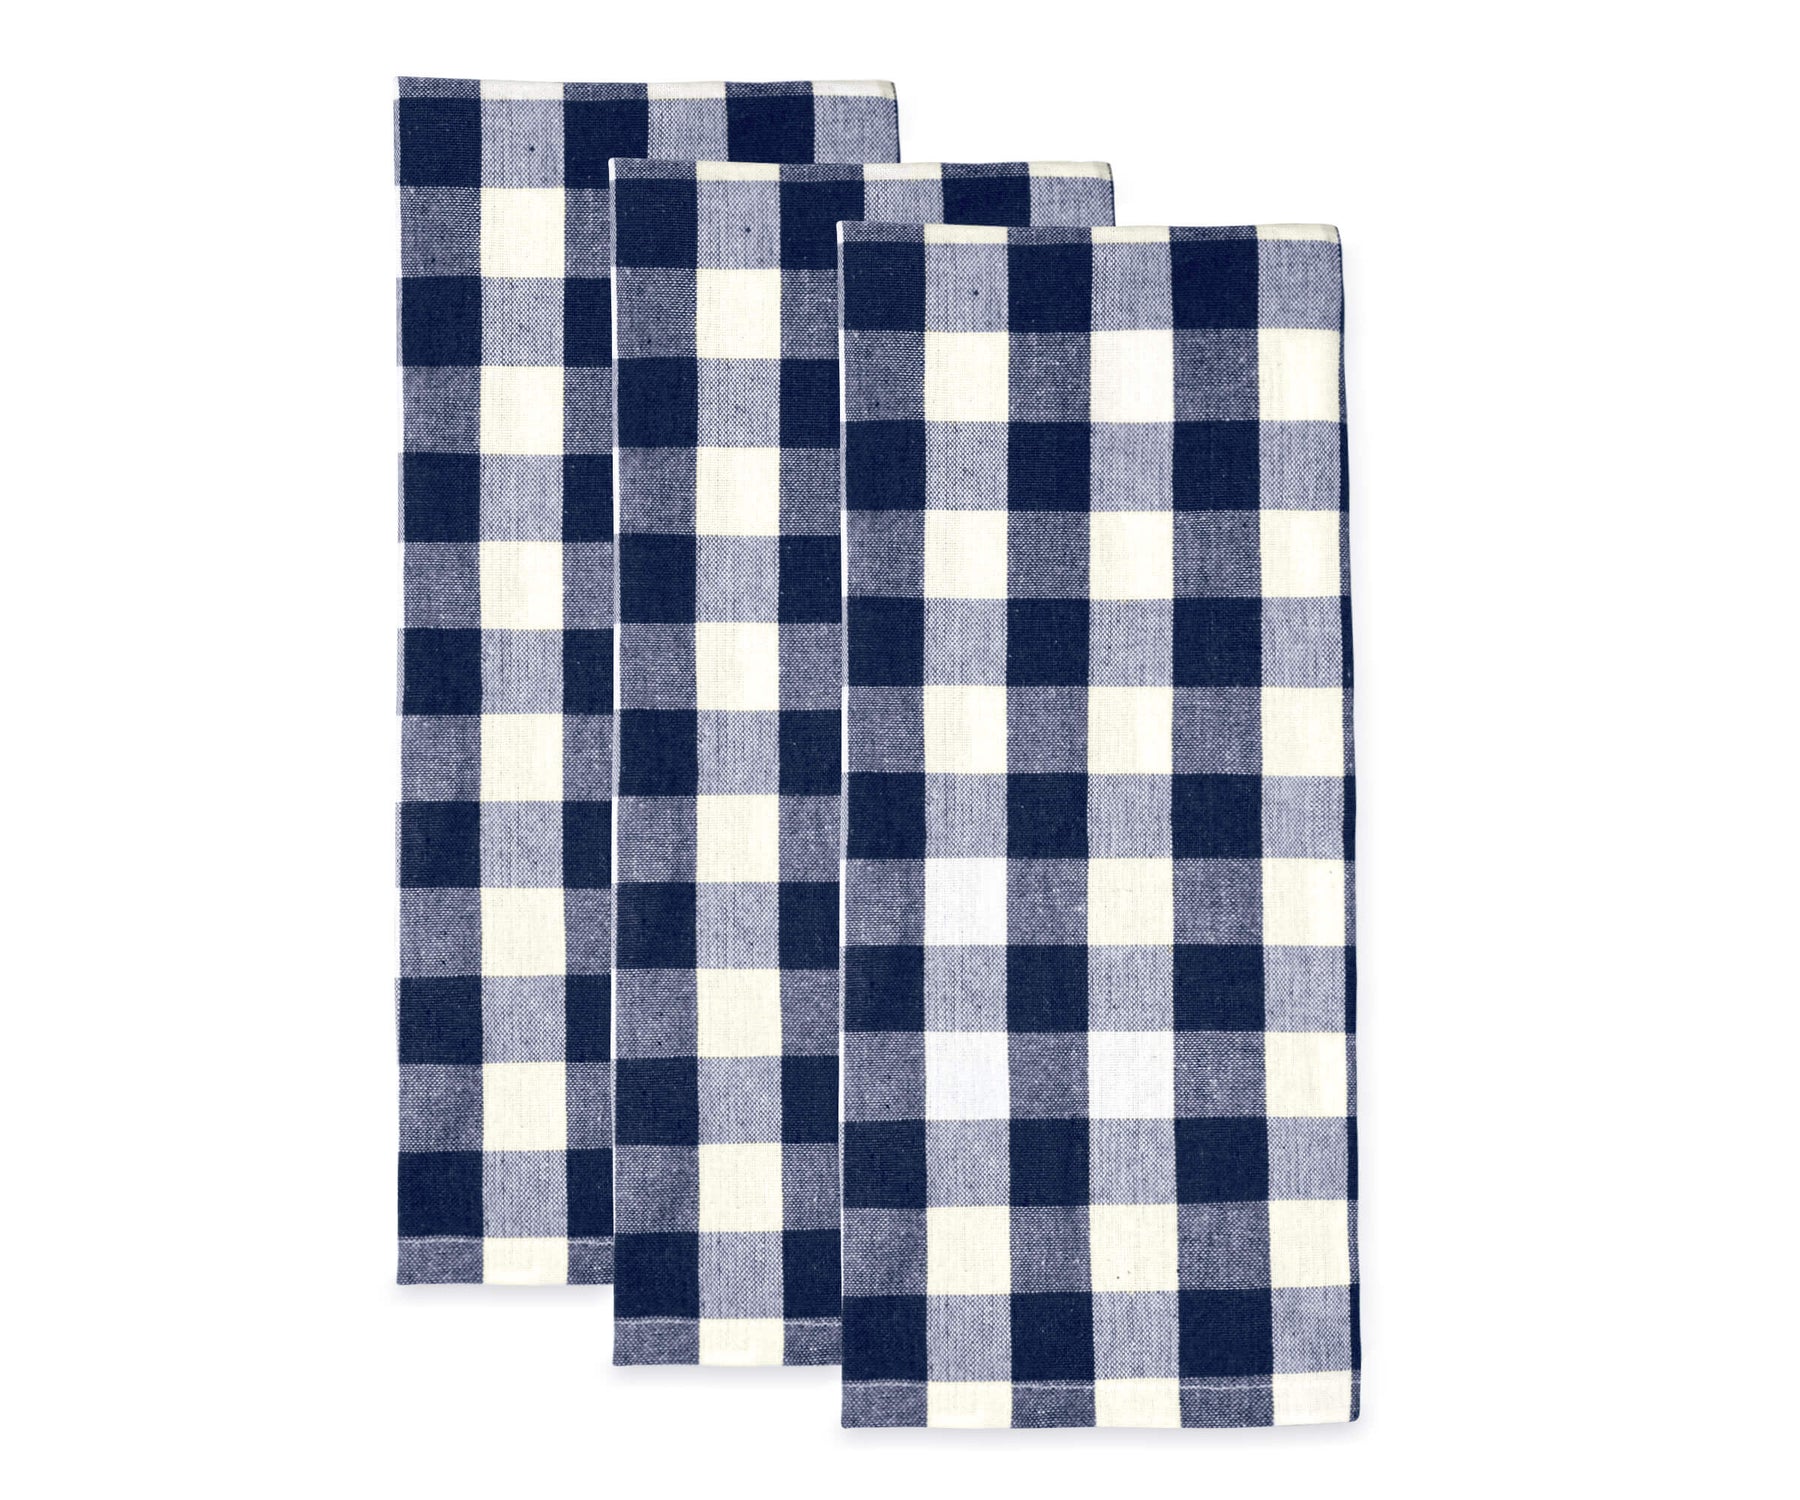 These blue and white striped dish towels are made from a soft and absorbent cotton blend, and their fun pattern will add a touch of color to your kitchen.